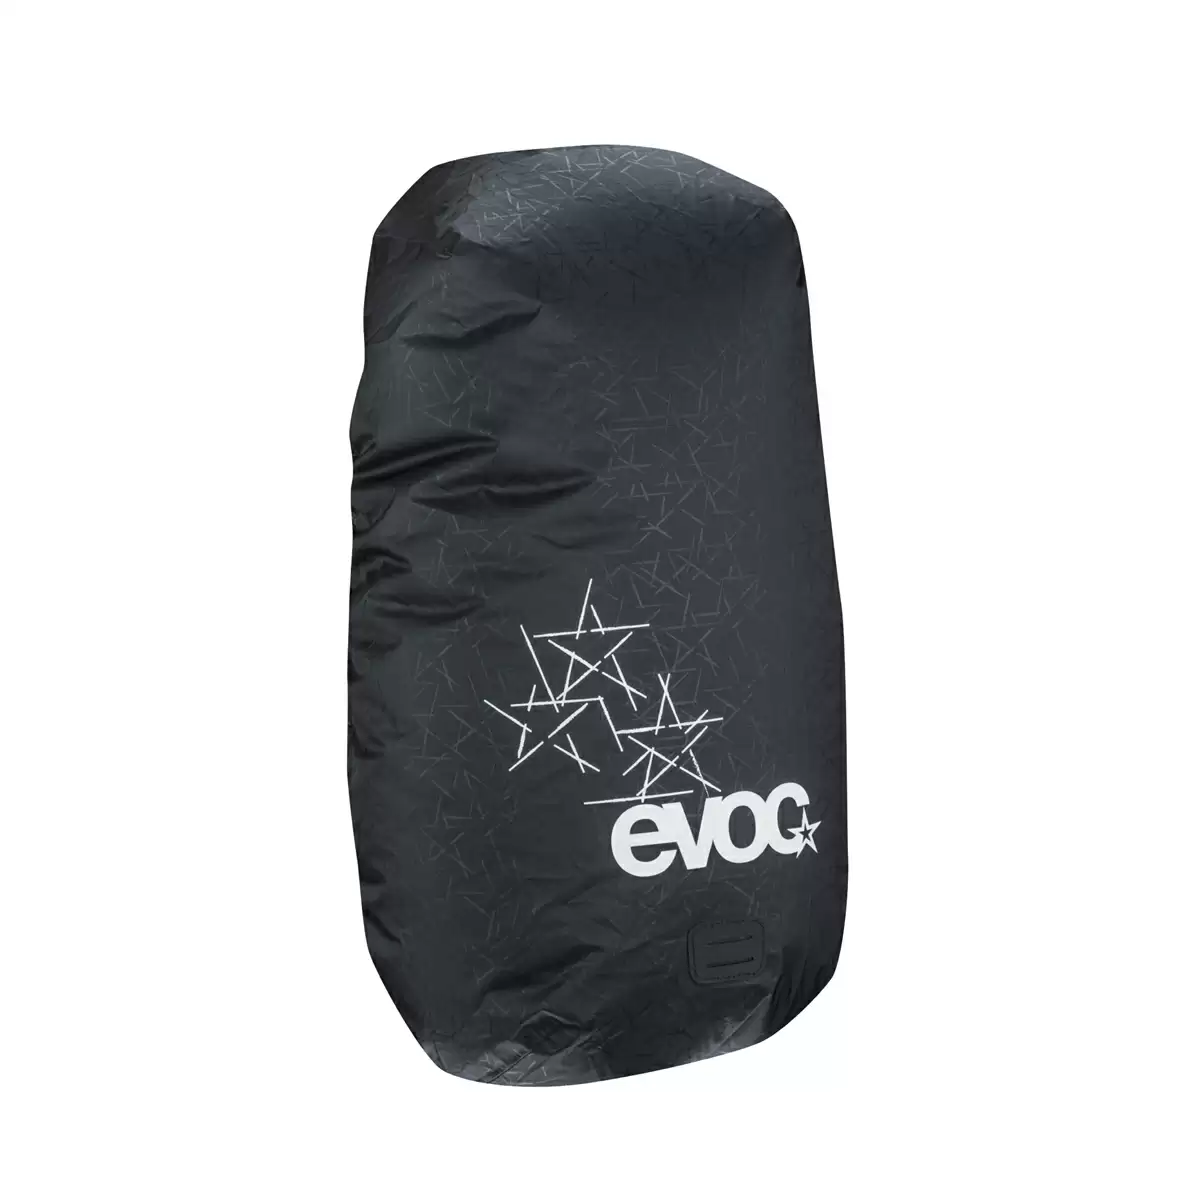 Raincover Sleeve black size M for backpacks from 10 to 25lt - image